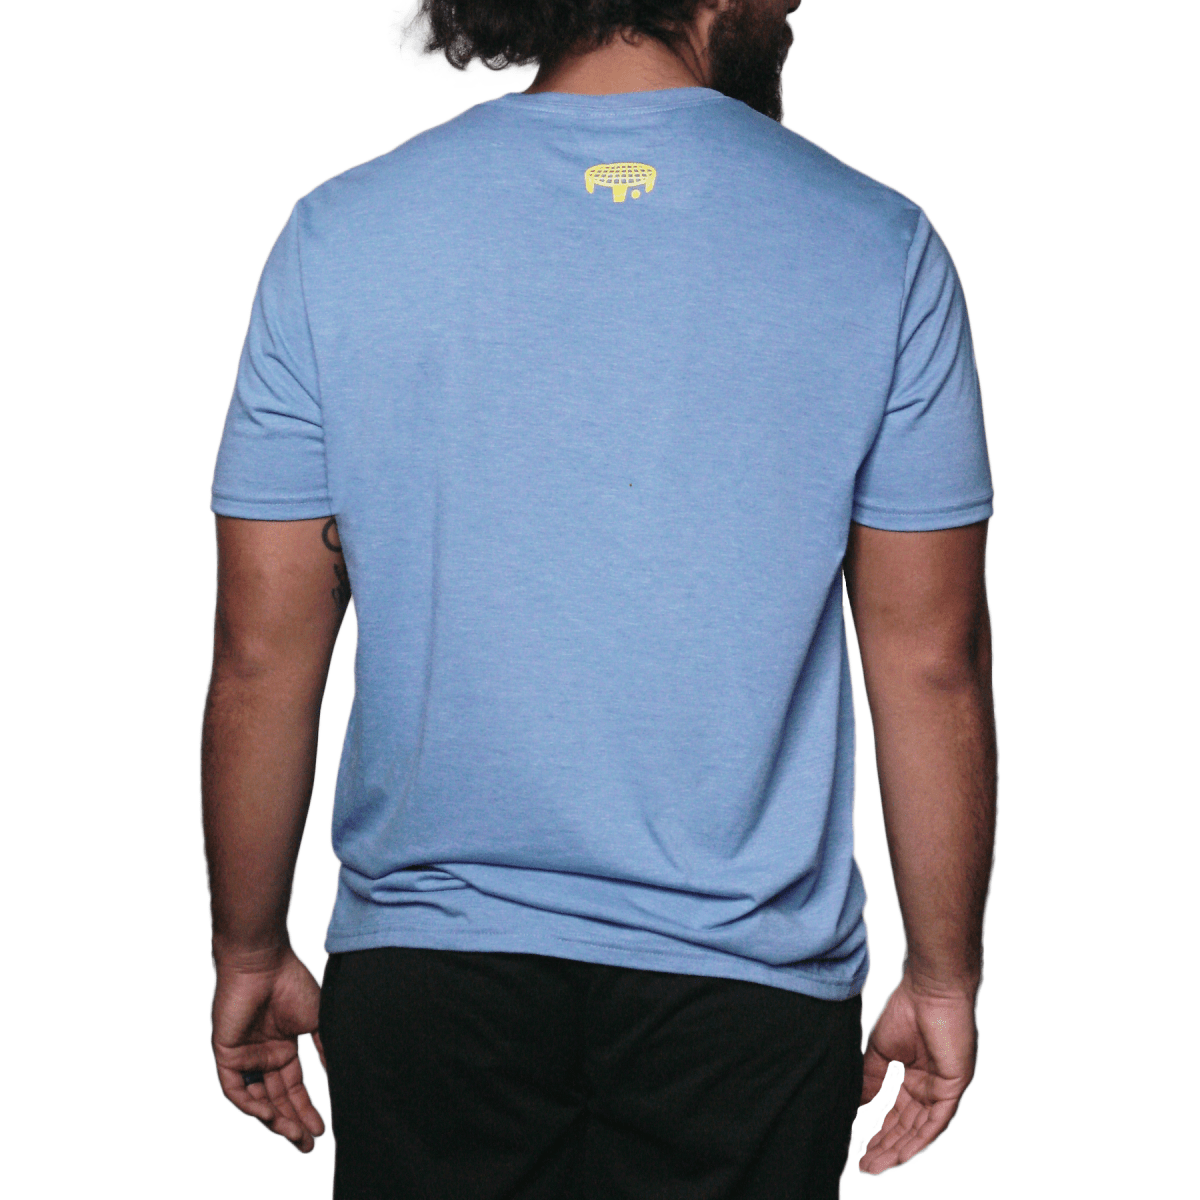 Classic Small Logo Tee - Olympic Blue Spikeball Store